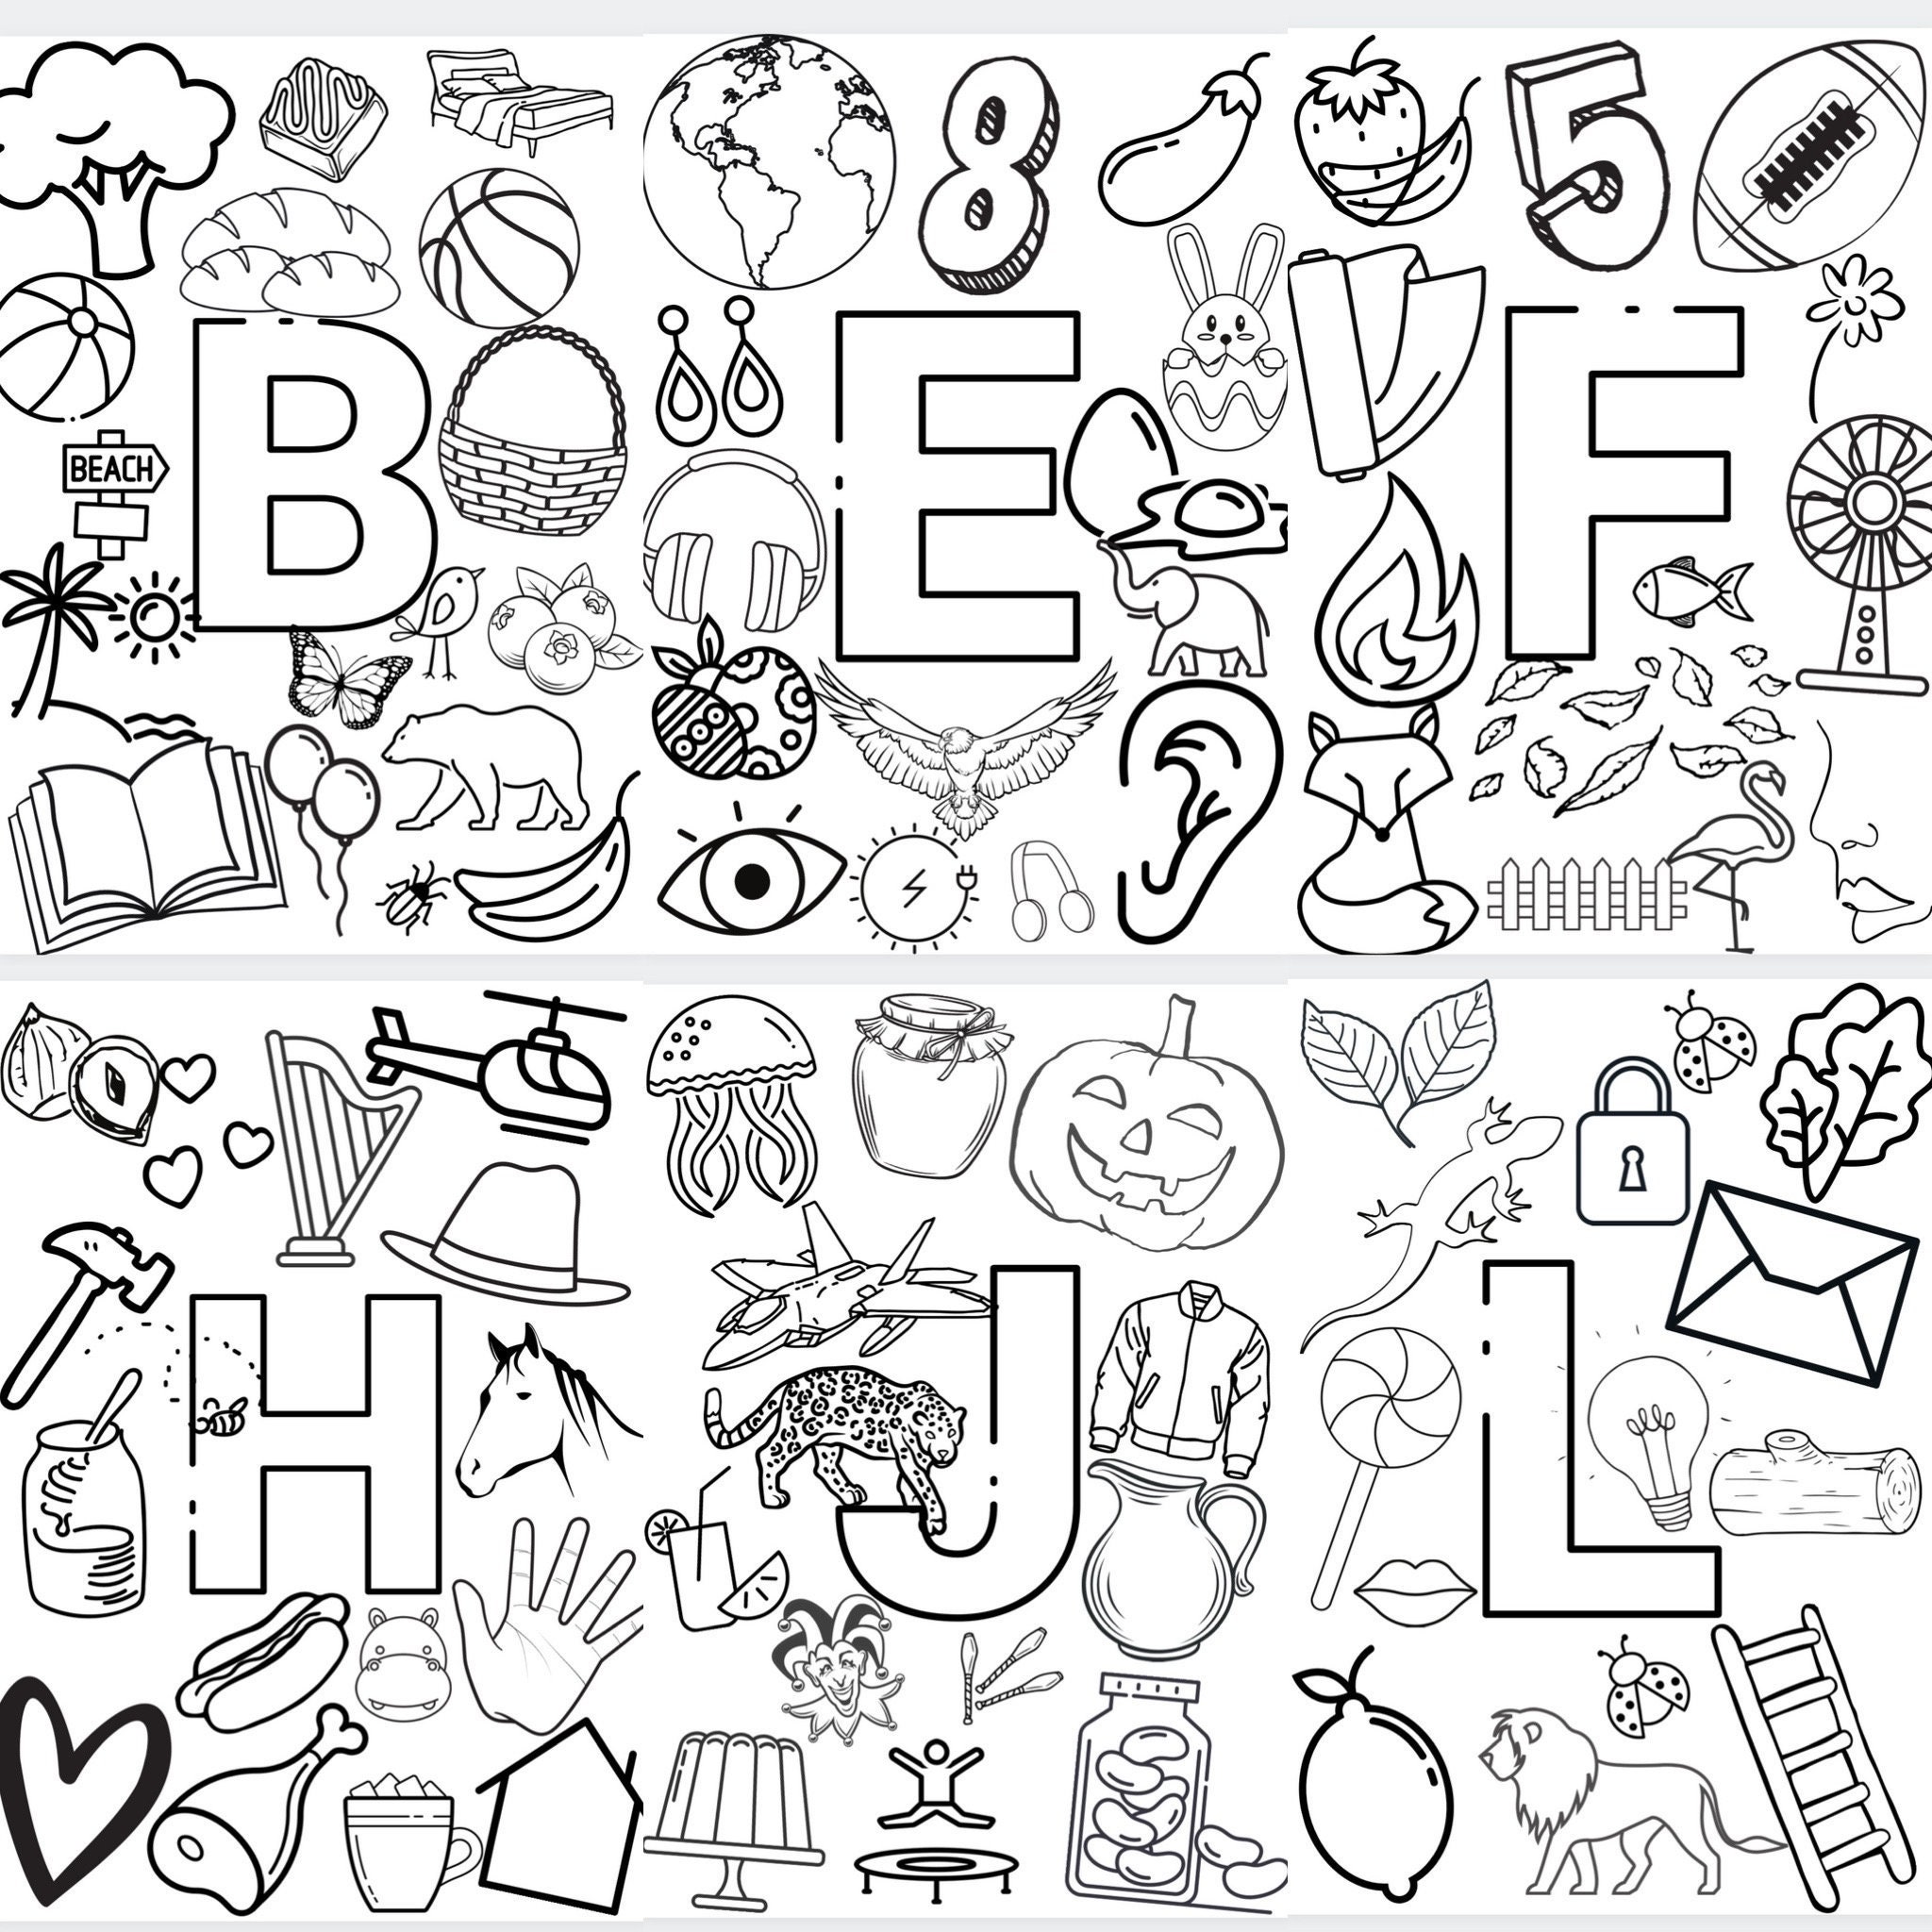 FULL Alphabet Coloring Pages/ 27 Coloring Page Bundle/ | Etsy